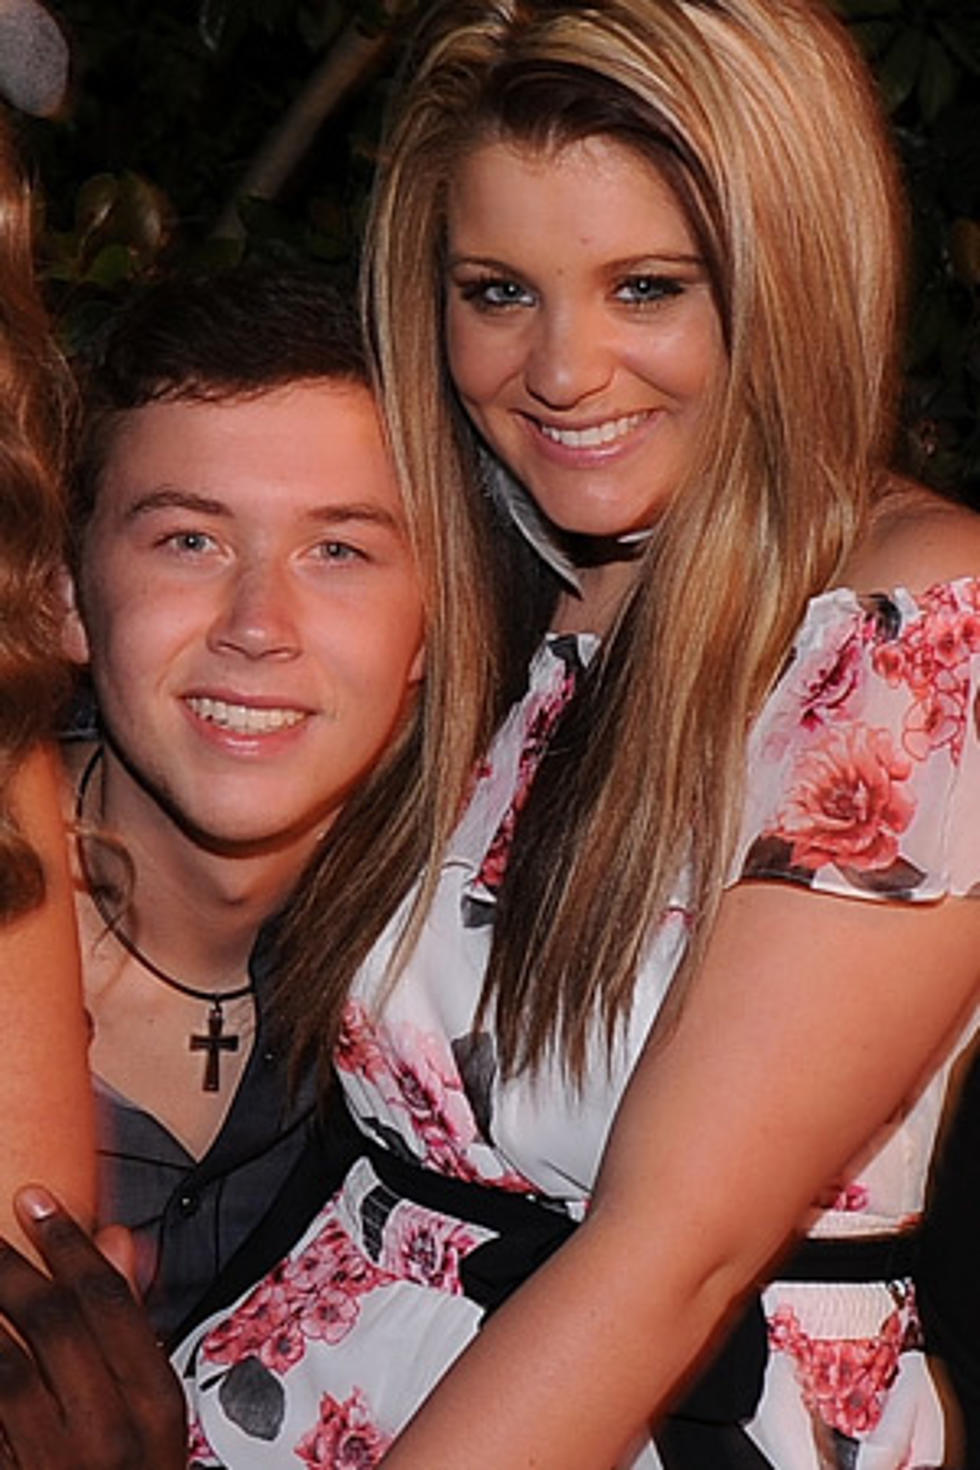 Scotty McCreery and Lauren Alaina Are Not Dating, Family Friend Says